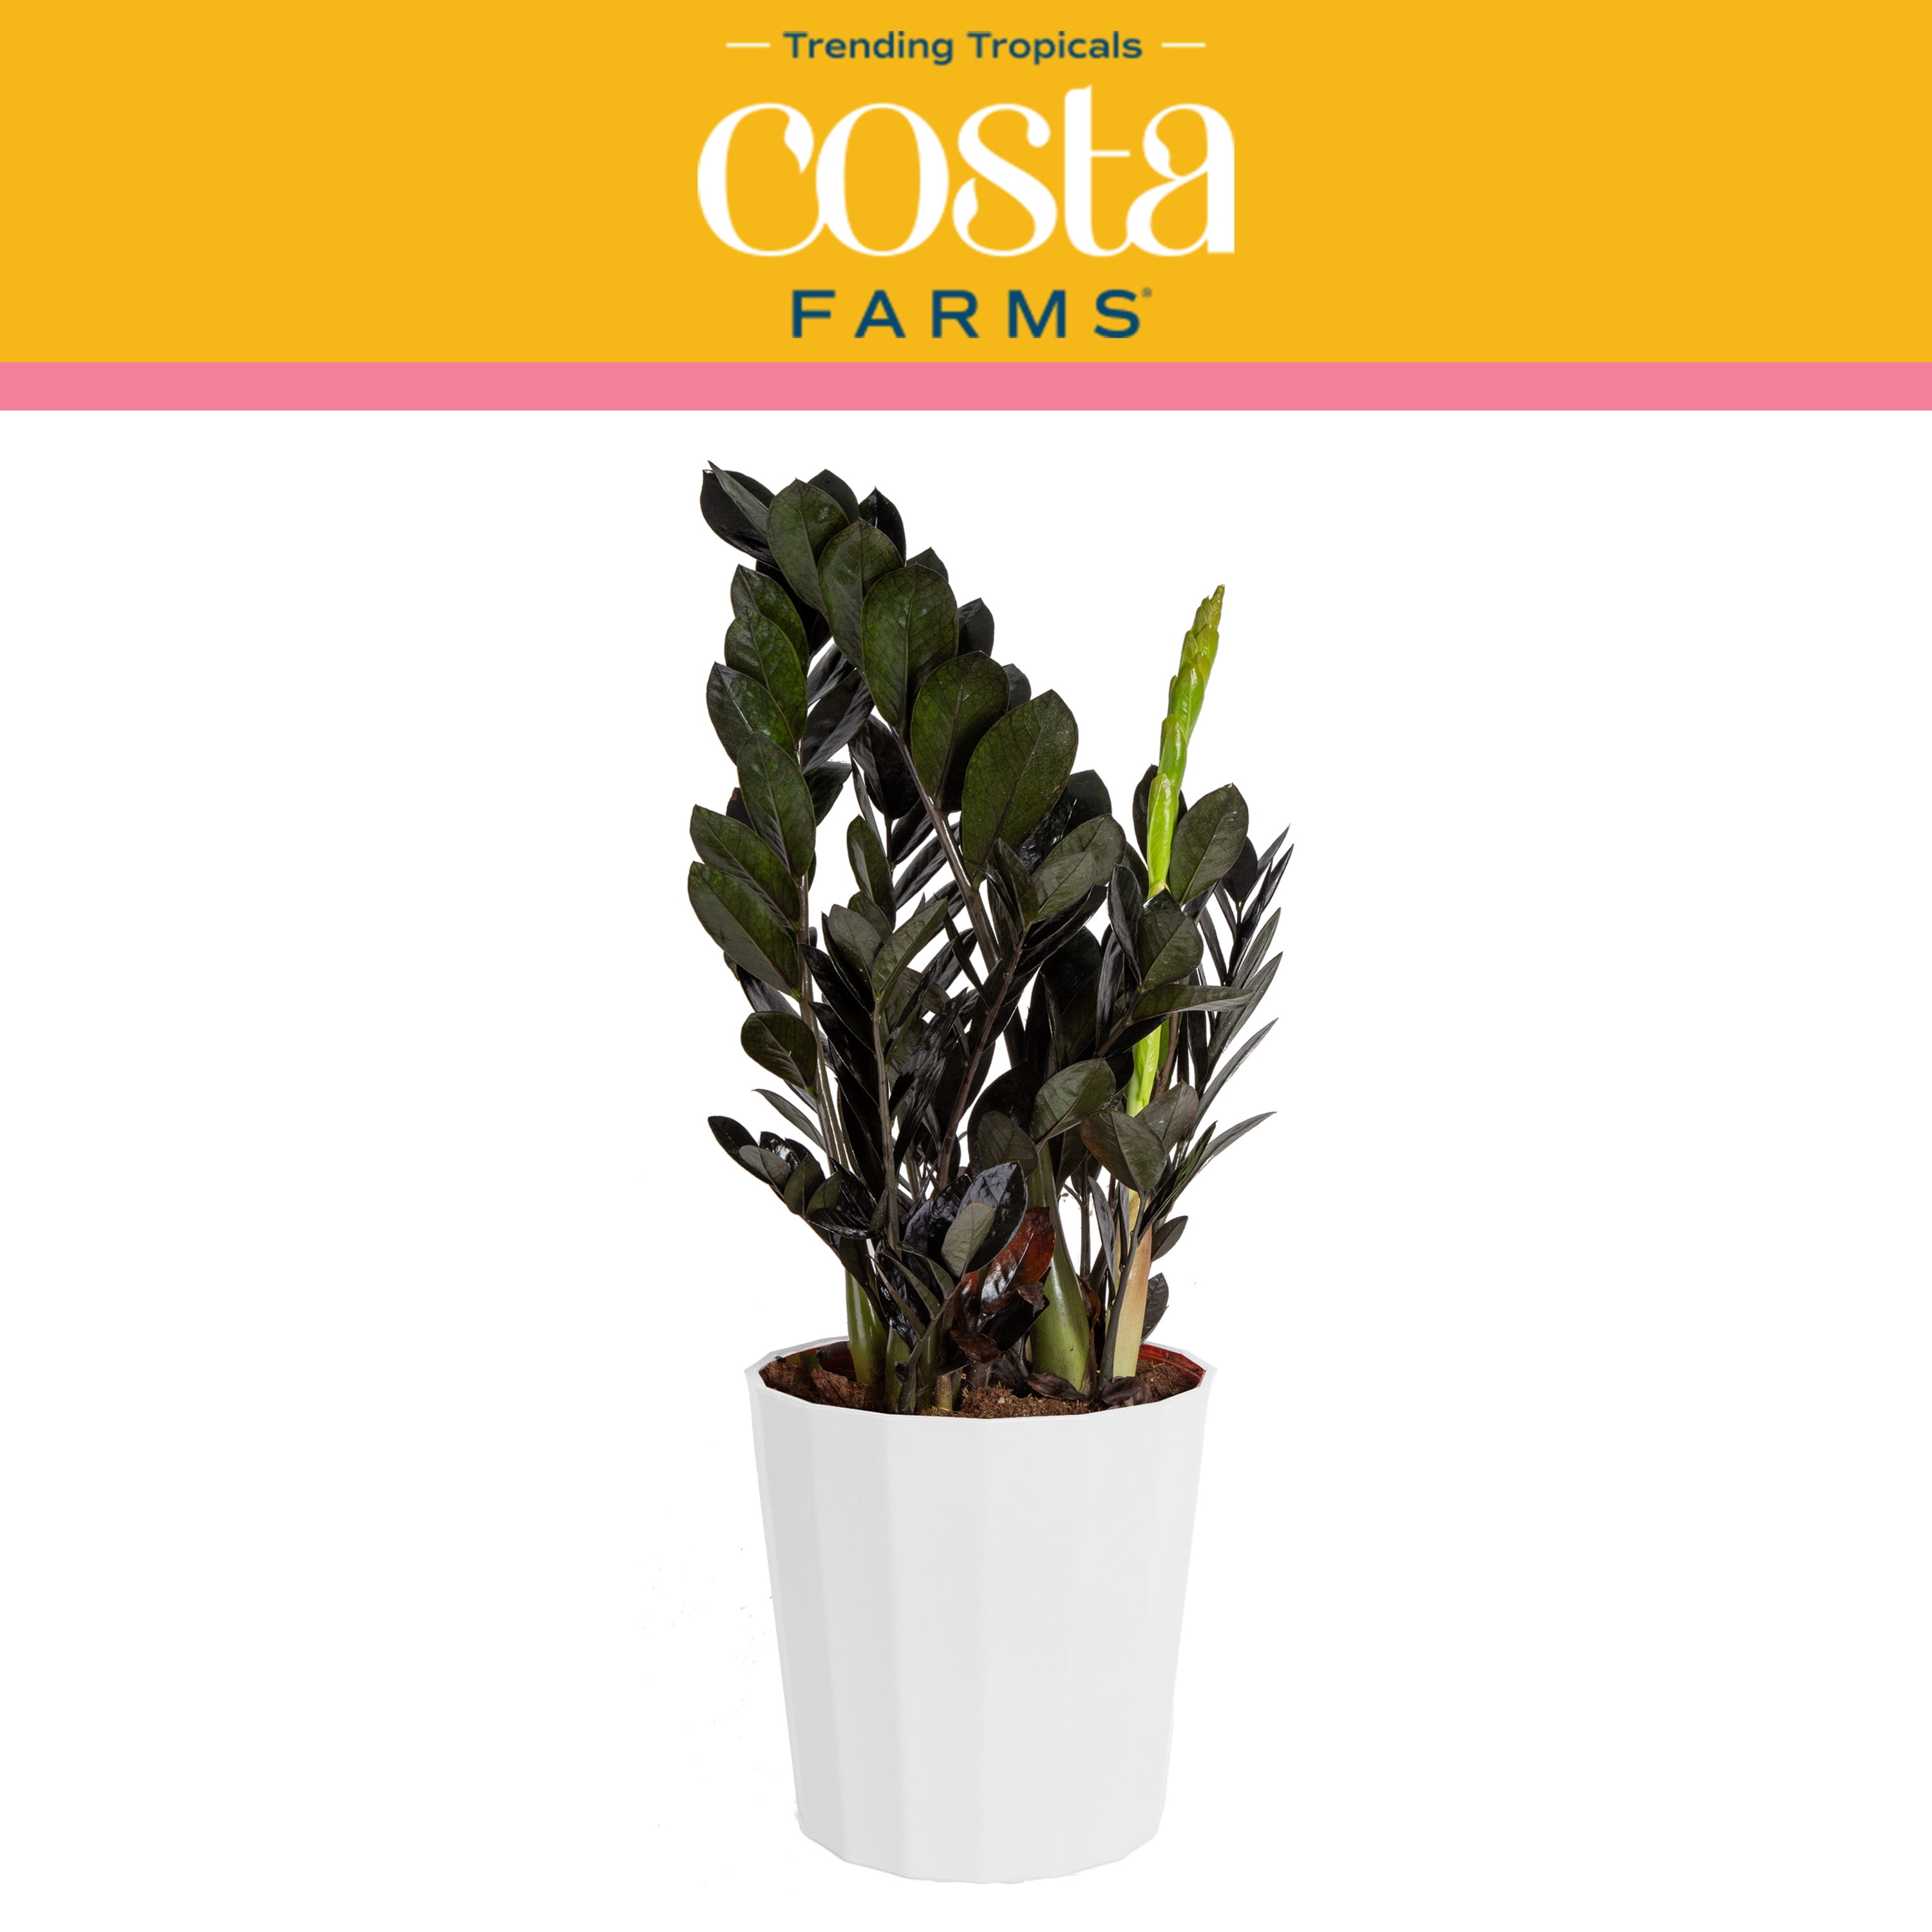 Costa Farms Trending Tropicals Indoor and Outdoor Tall Black Raven® ZZ Zamioculcas 'Dowon'; Medium, Indirect Light Plant in 10in. Décor Pot - Walmart.com